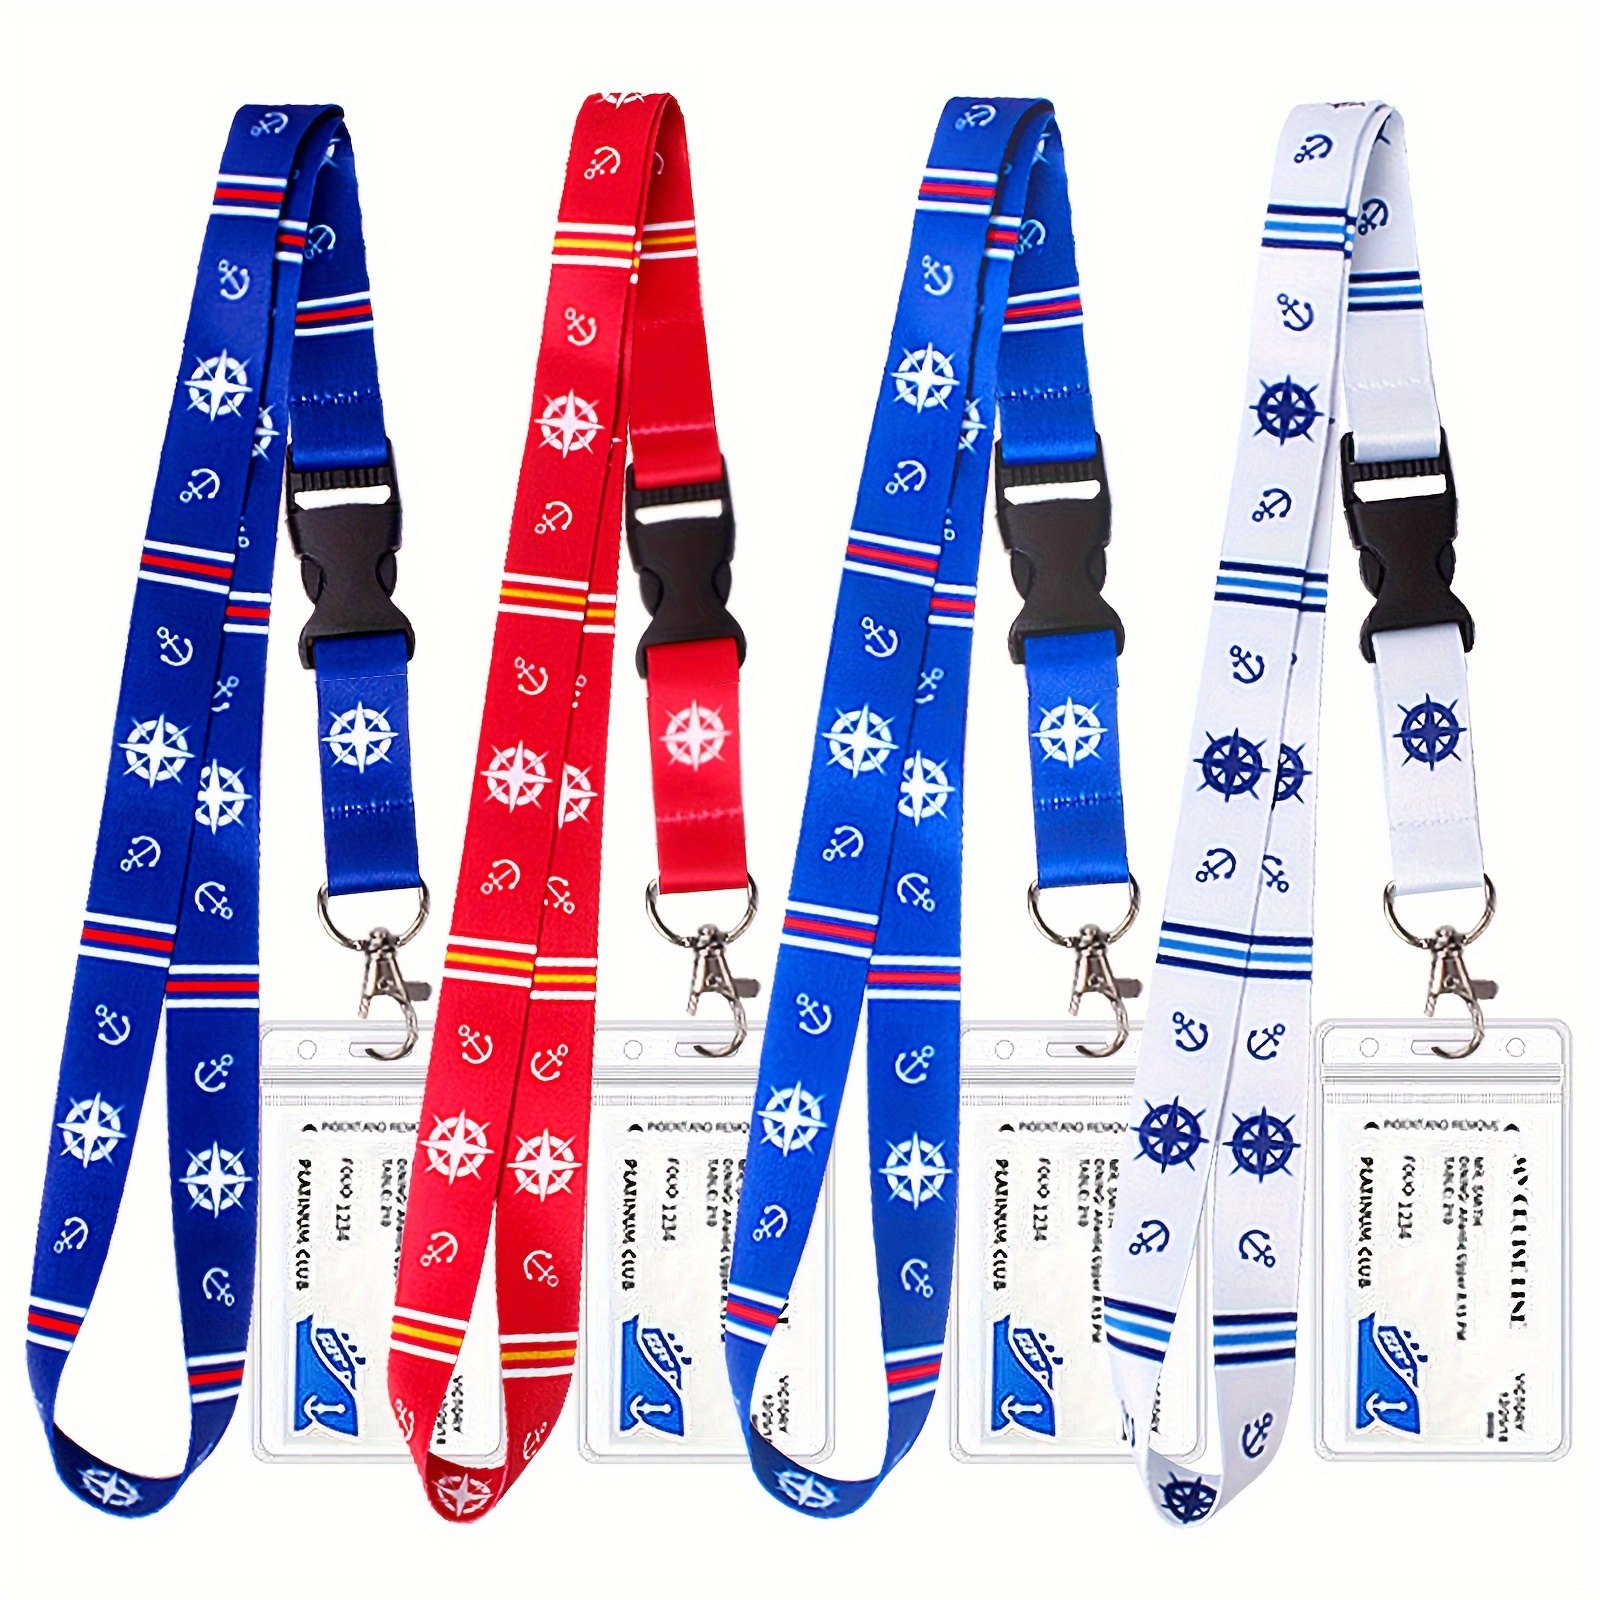 

4 Pack Cruise Lanyard With Waterproof Id Badge Holder - Perfect For All Cruises, Ships, Key Cards & Essential Accessories